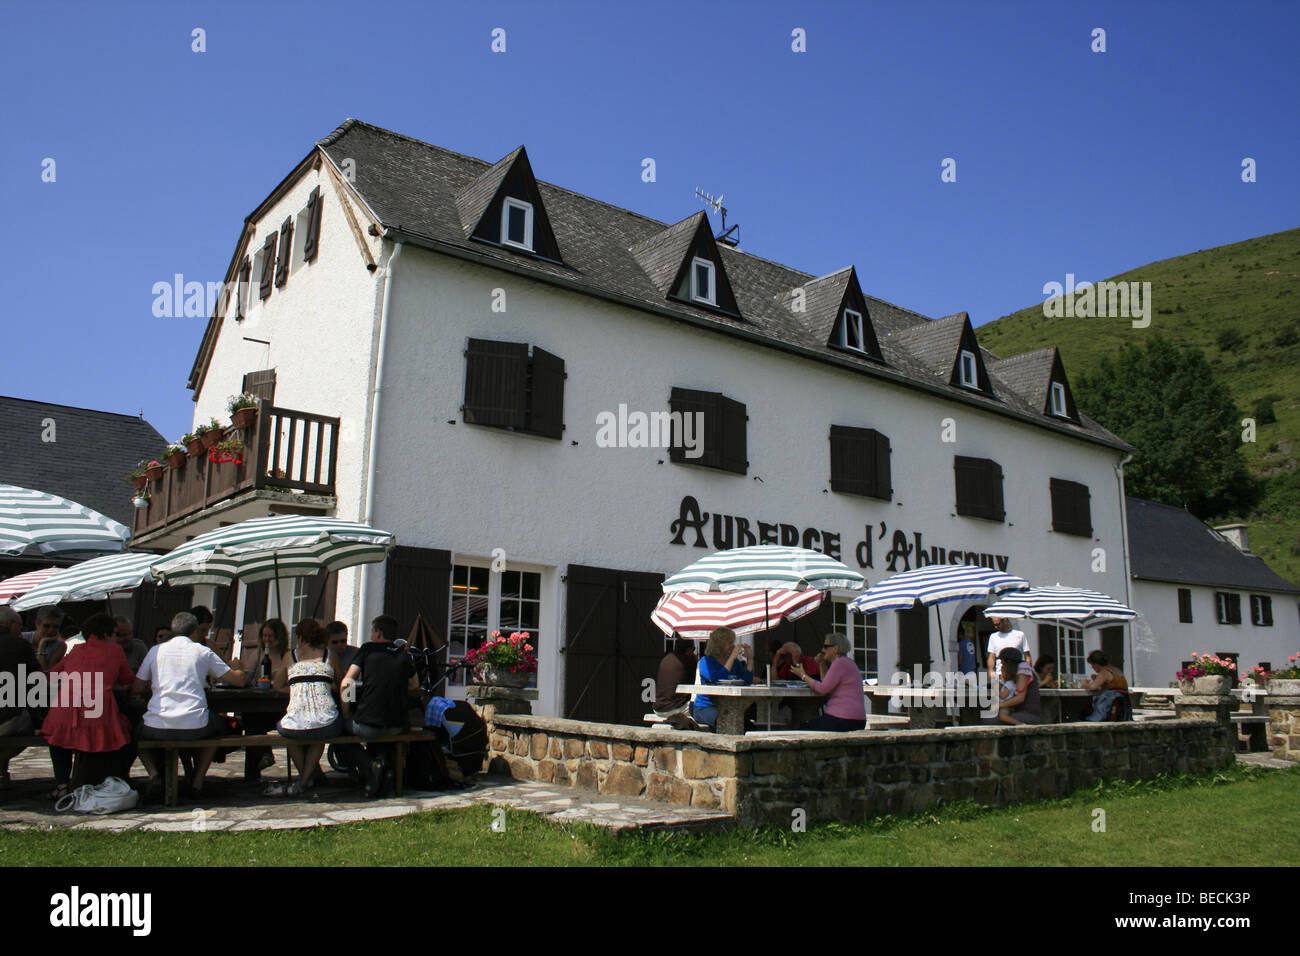 People eating at the Auberge d' Ahusquy in the Basque Country Stock Photo